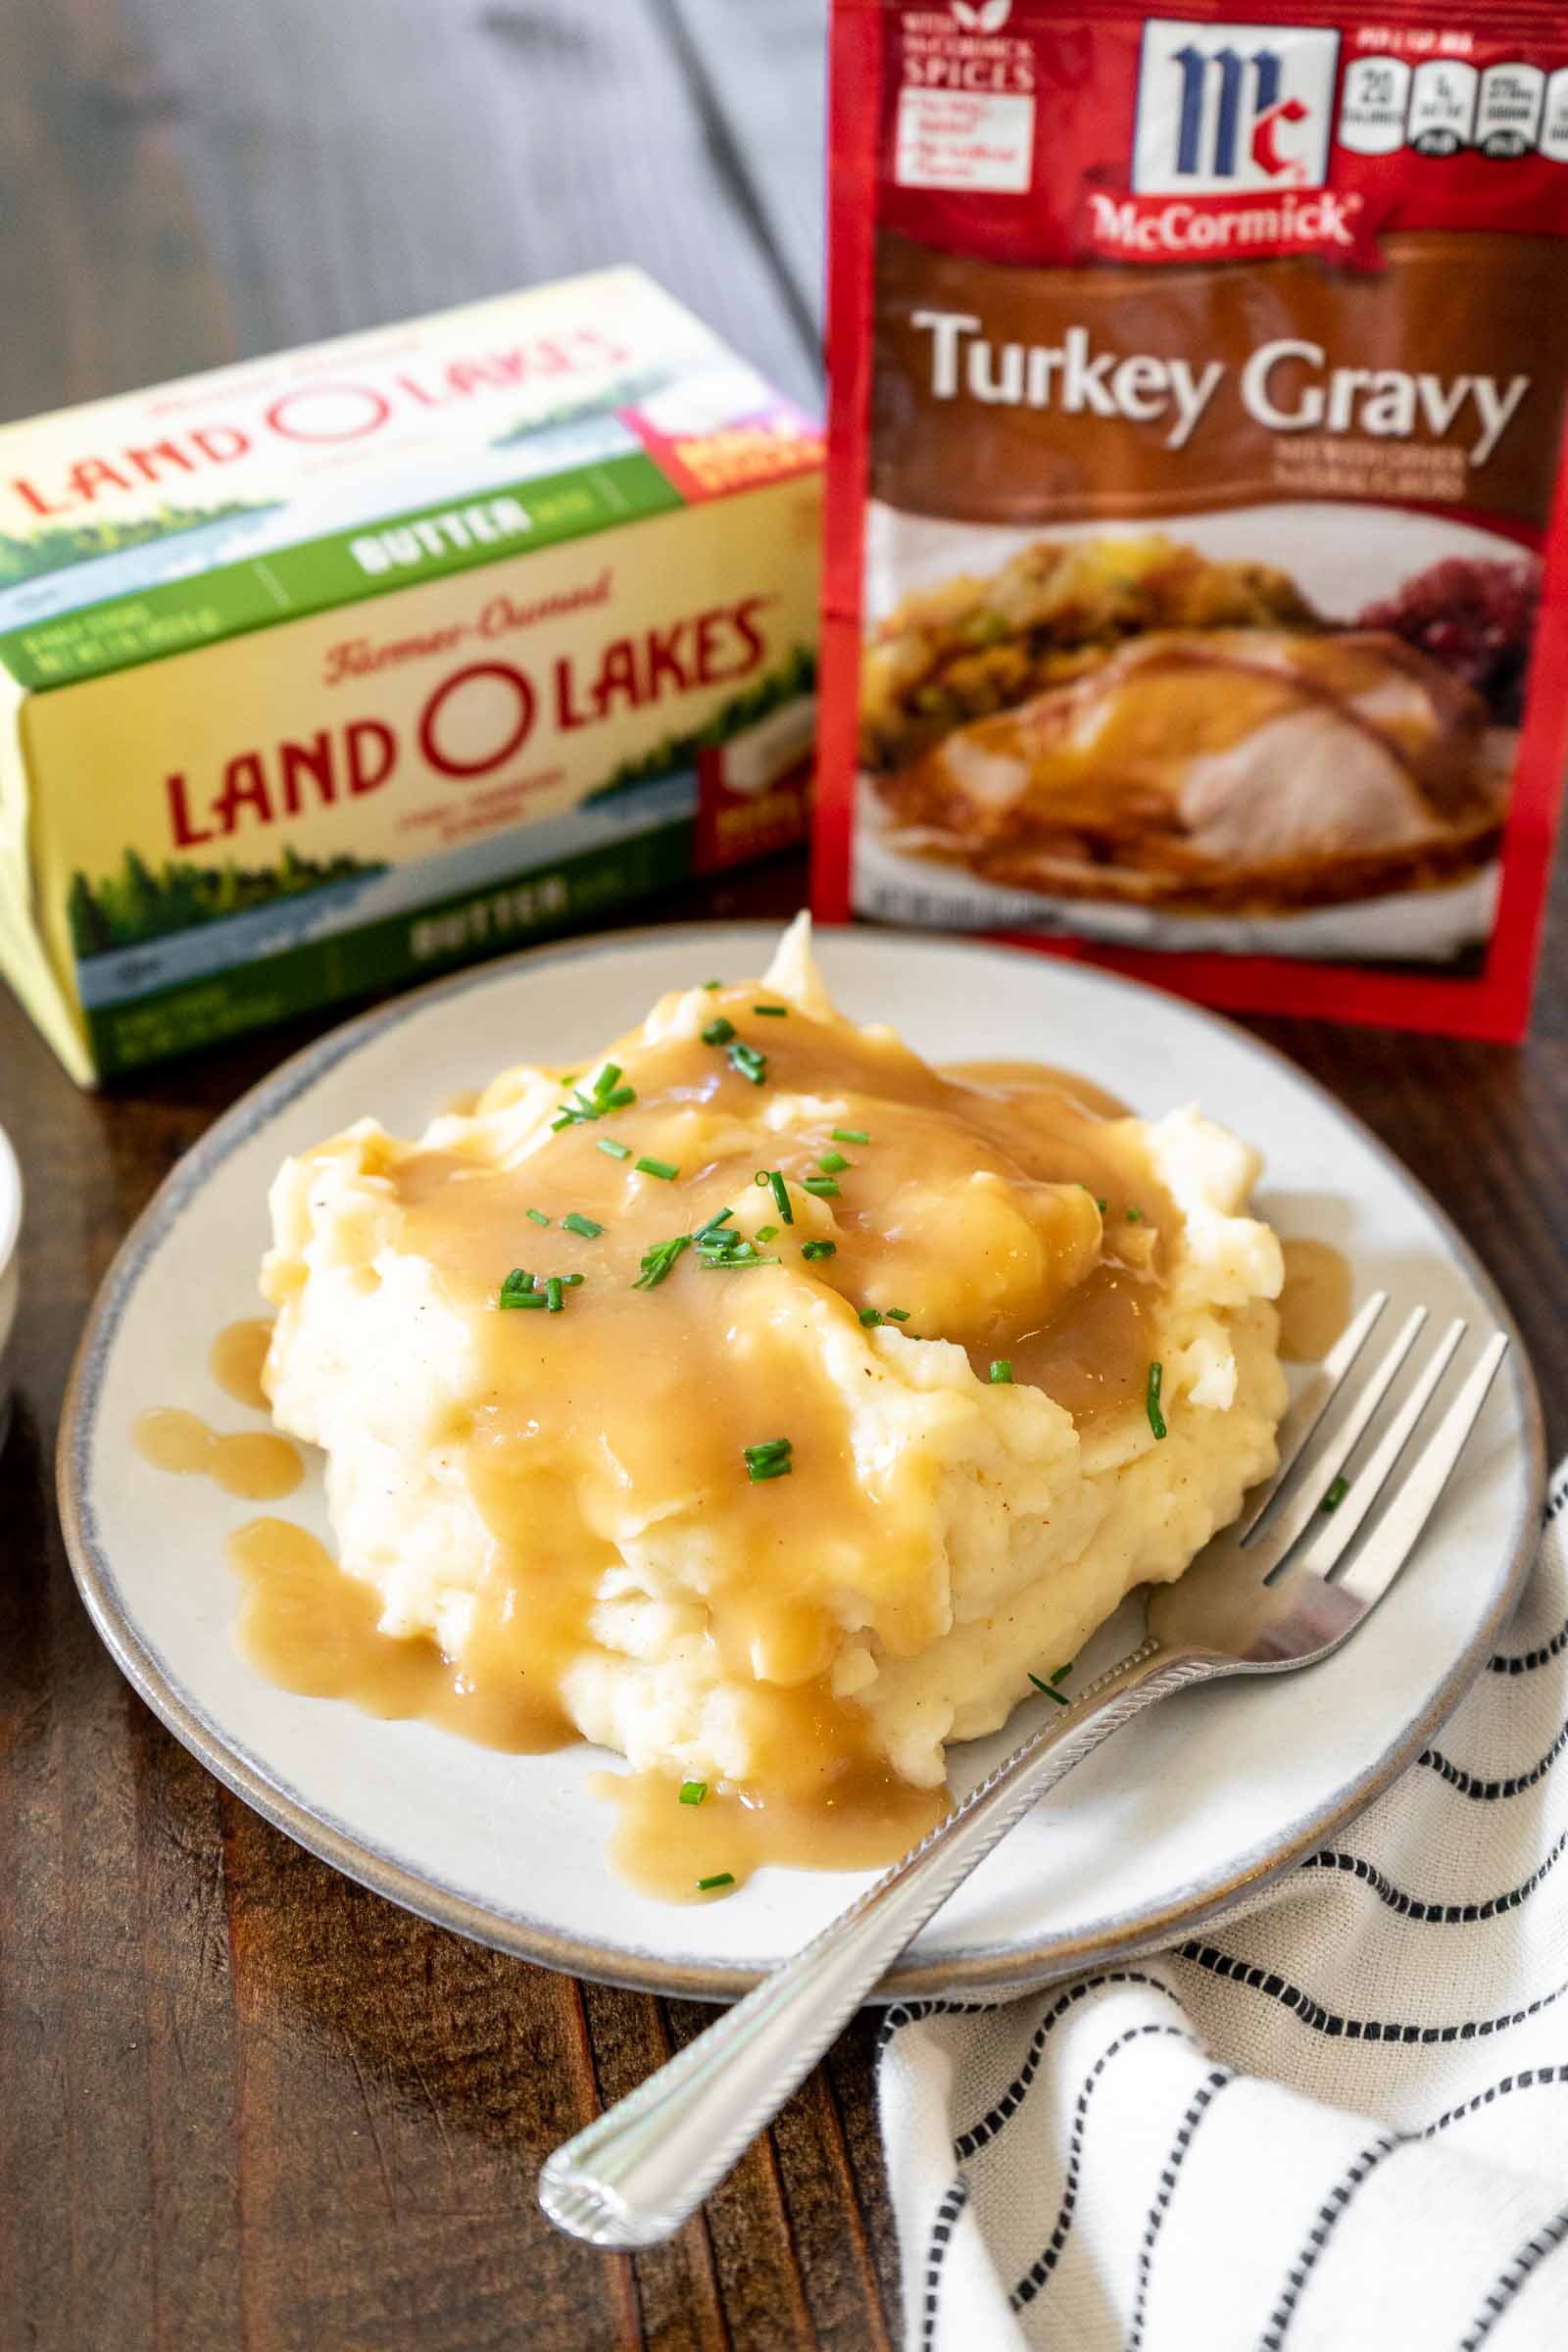 A plate of mashed potatoes and gravy with Land o Lakes butter and McCormick Turkey Gravy packages